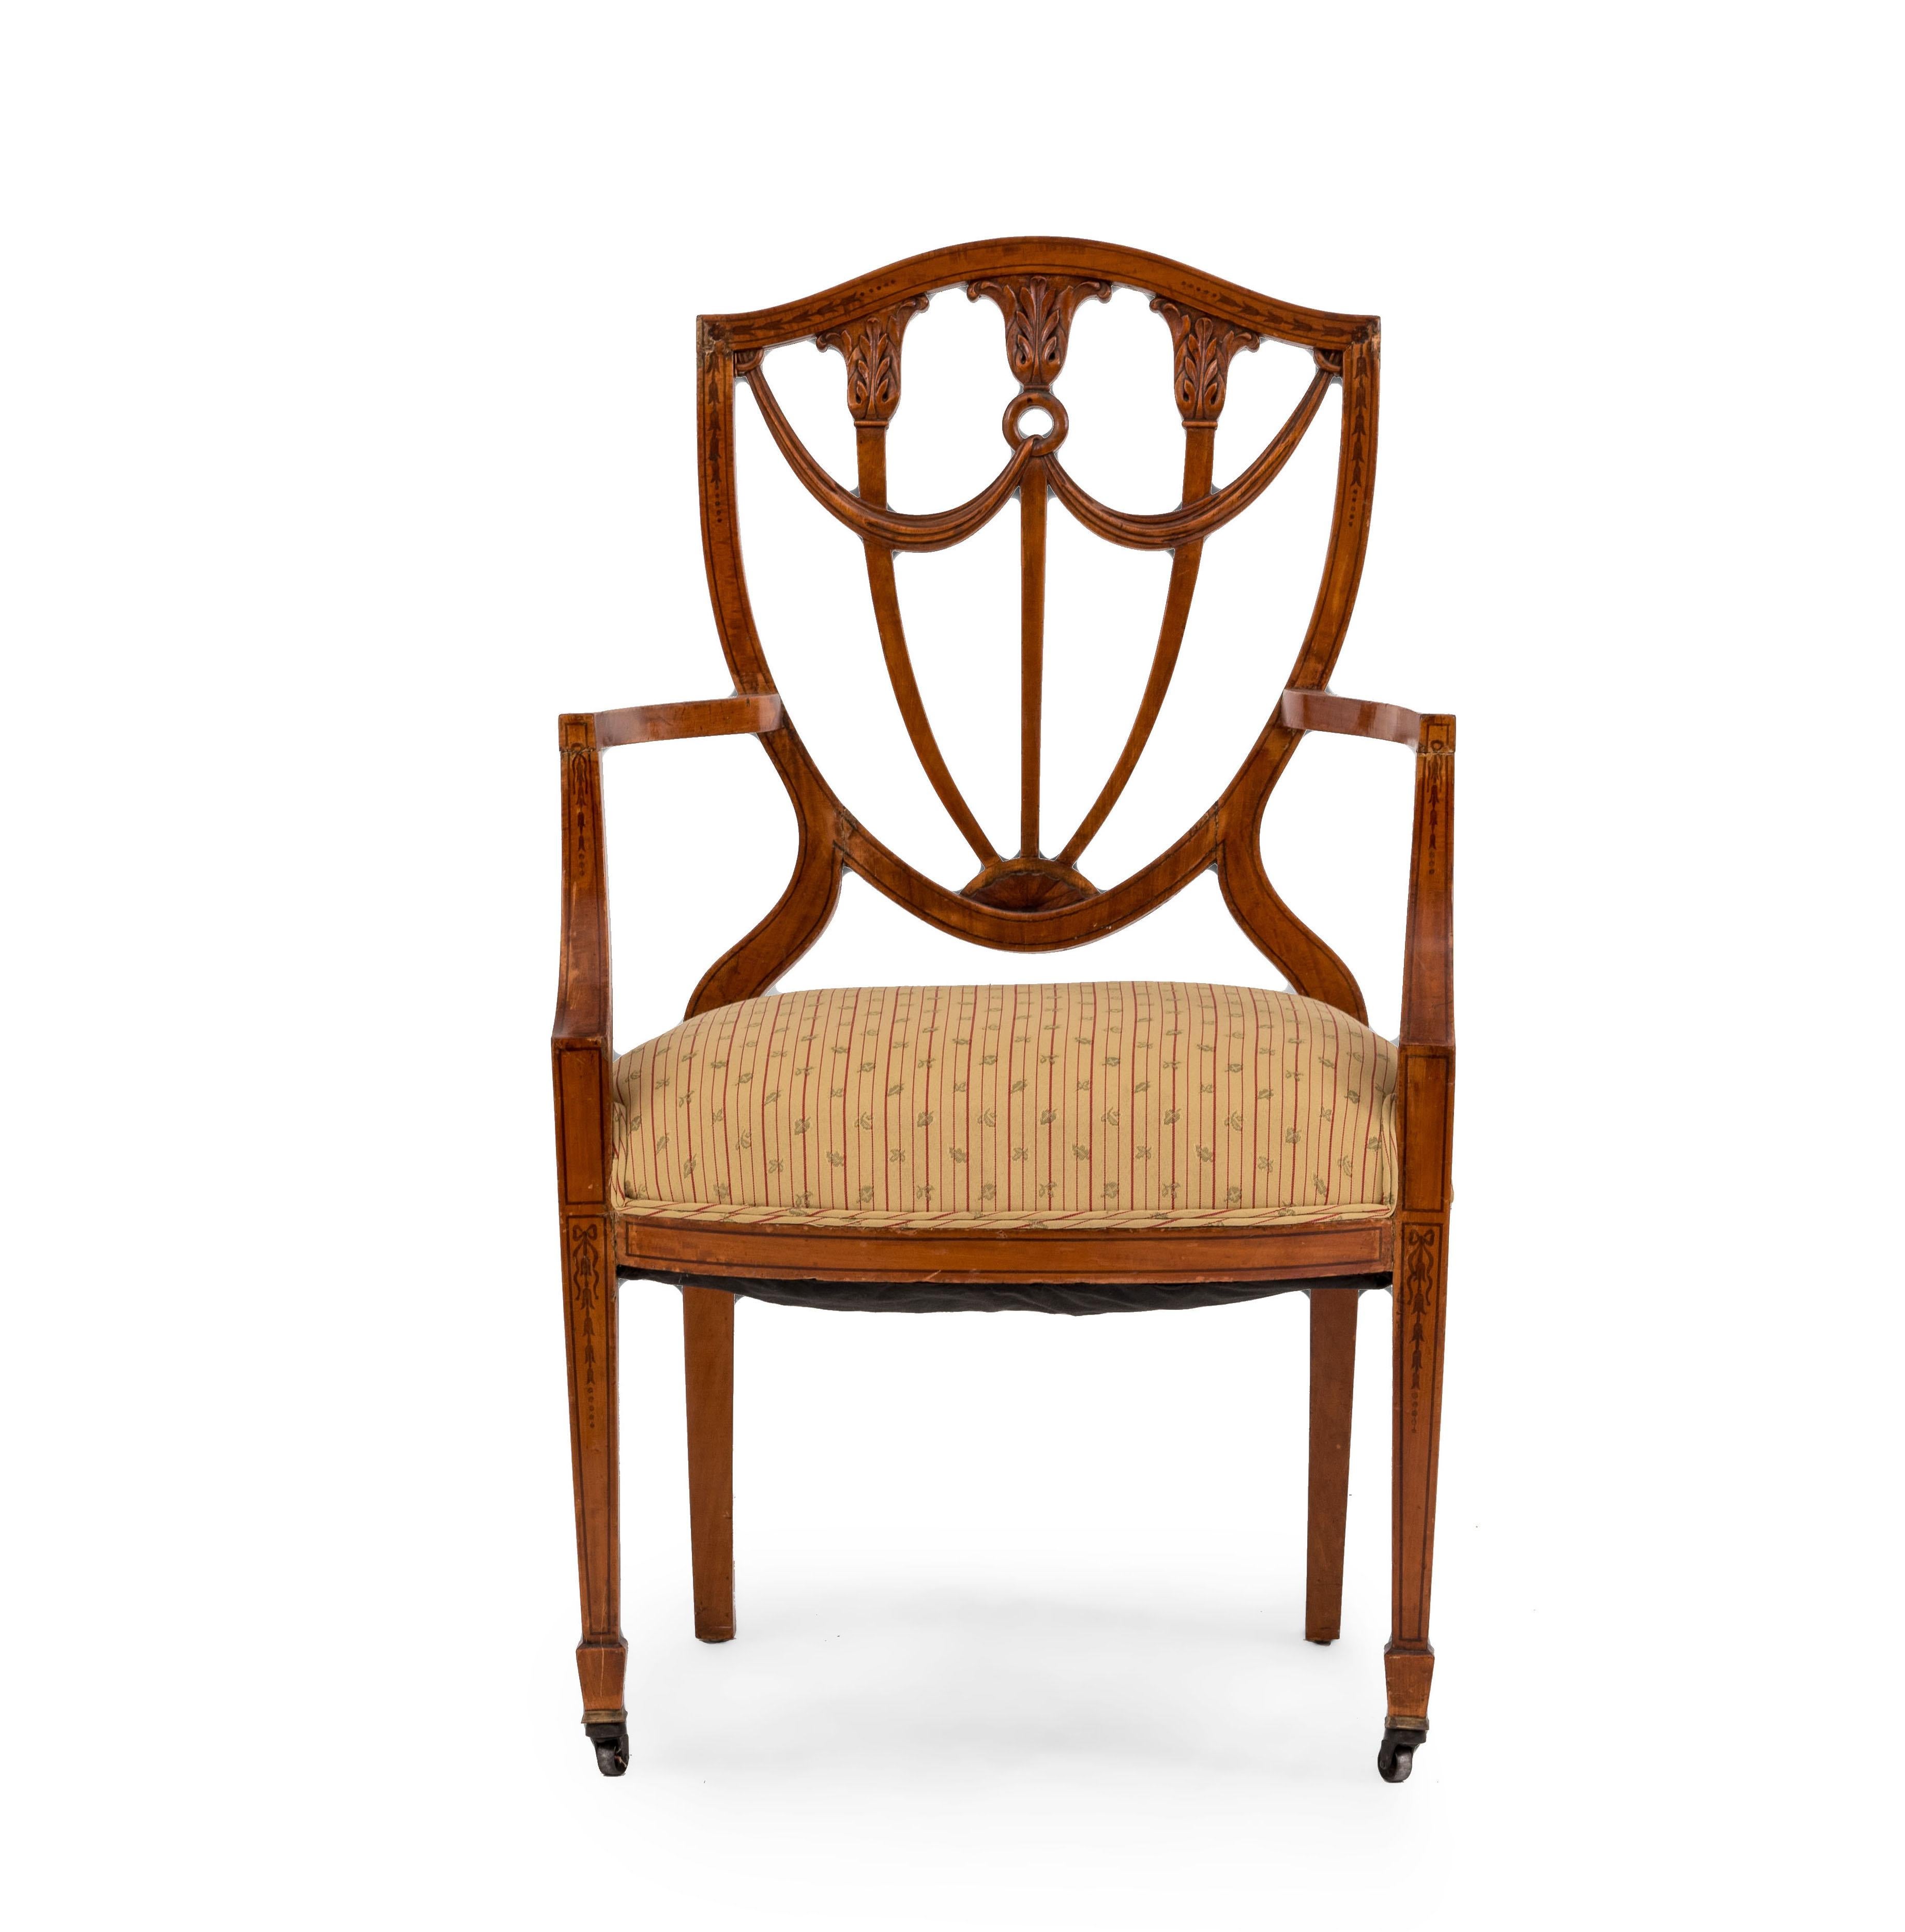 Pair of English Adam style satinwood shield-back Armchairs. (Related item: 030011A)
